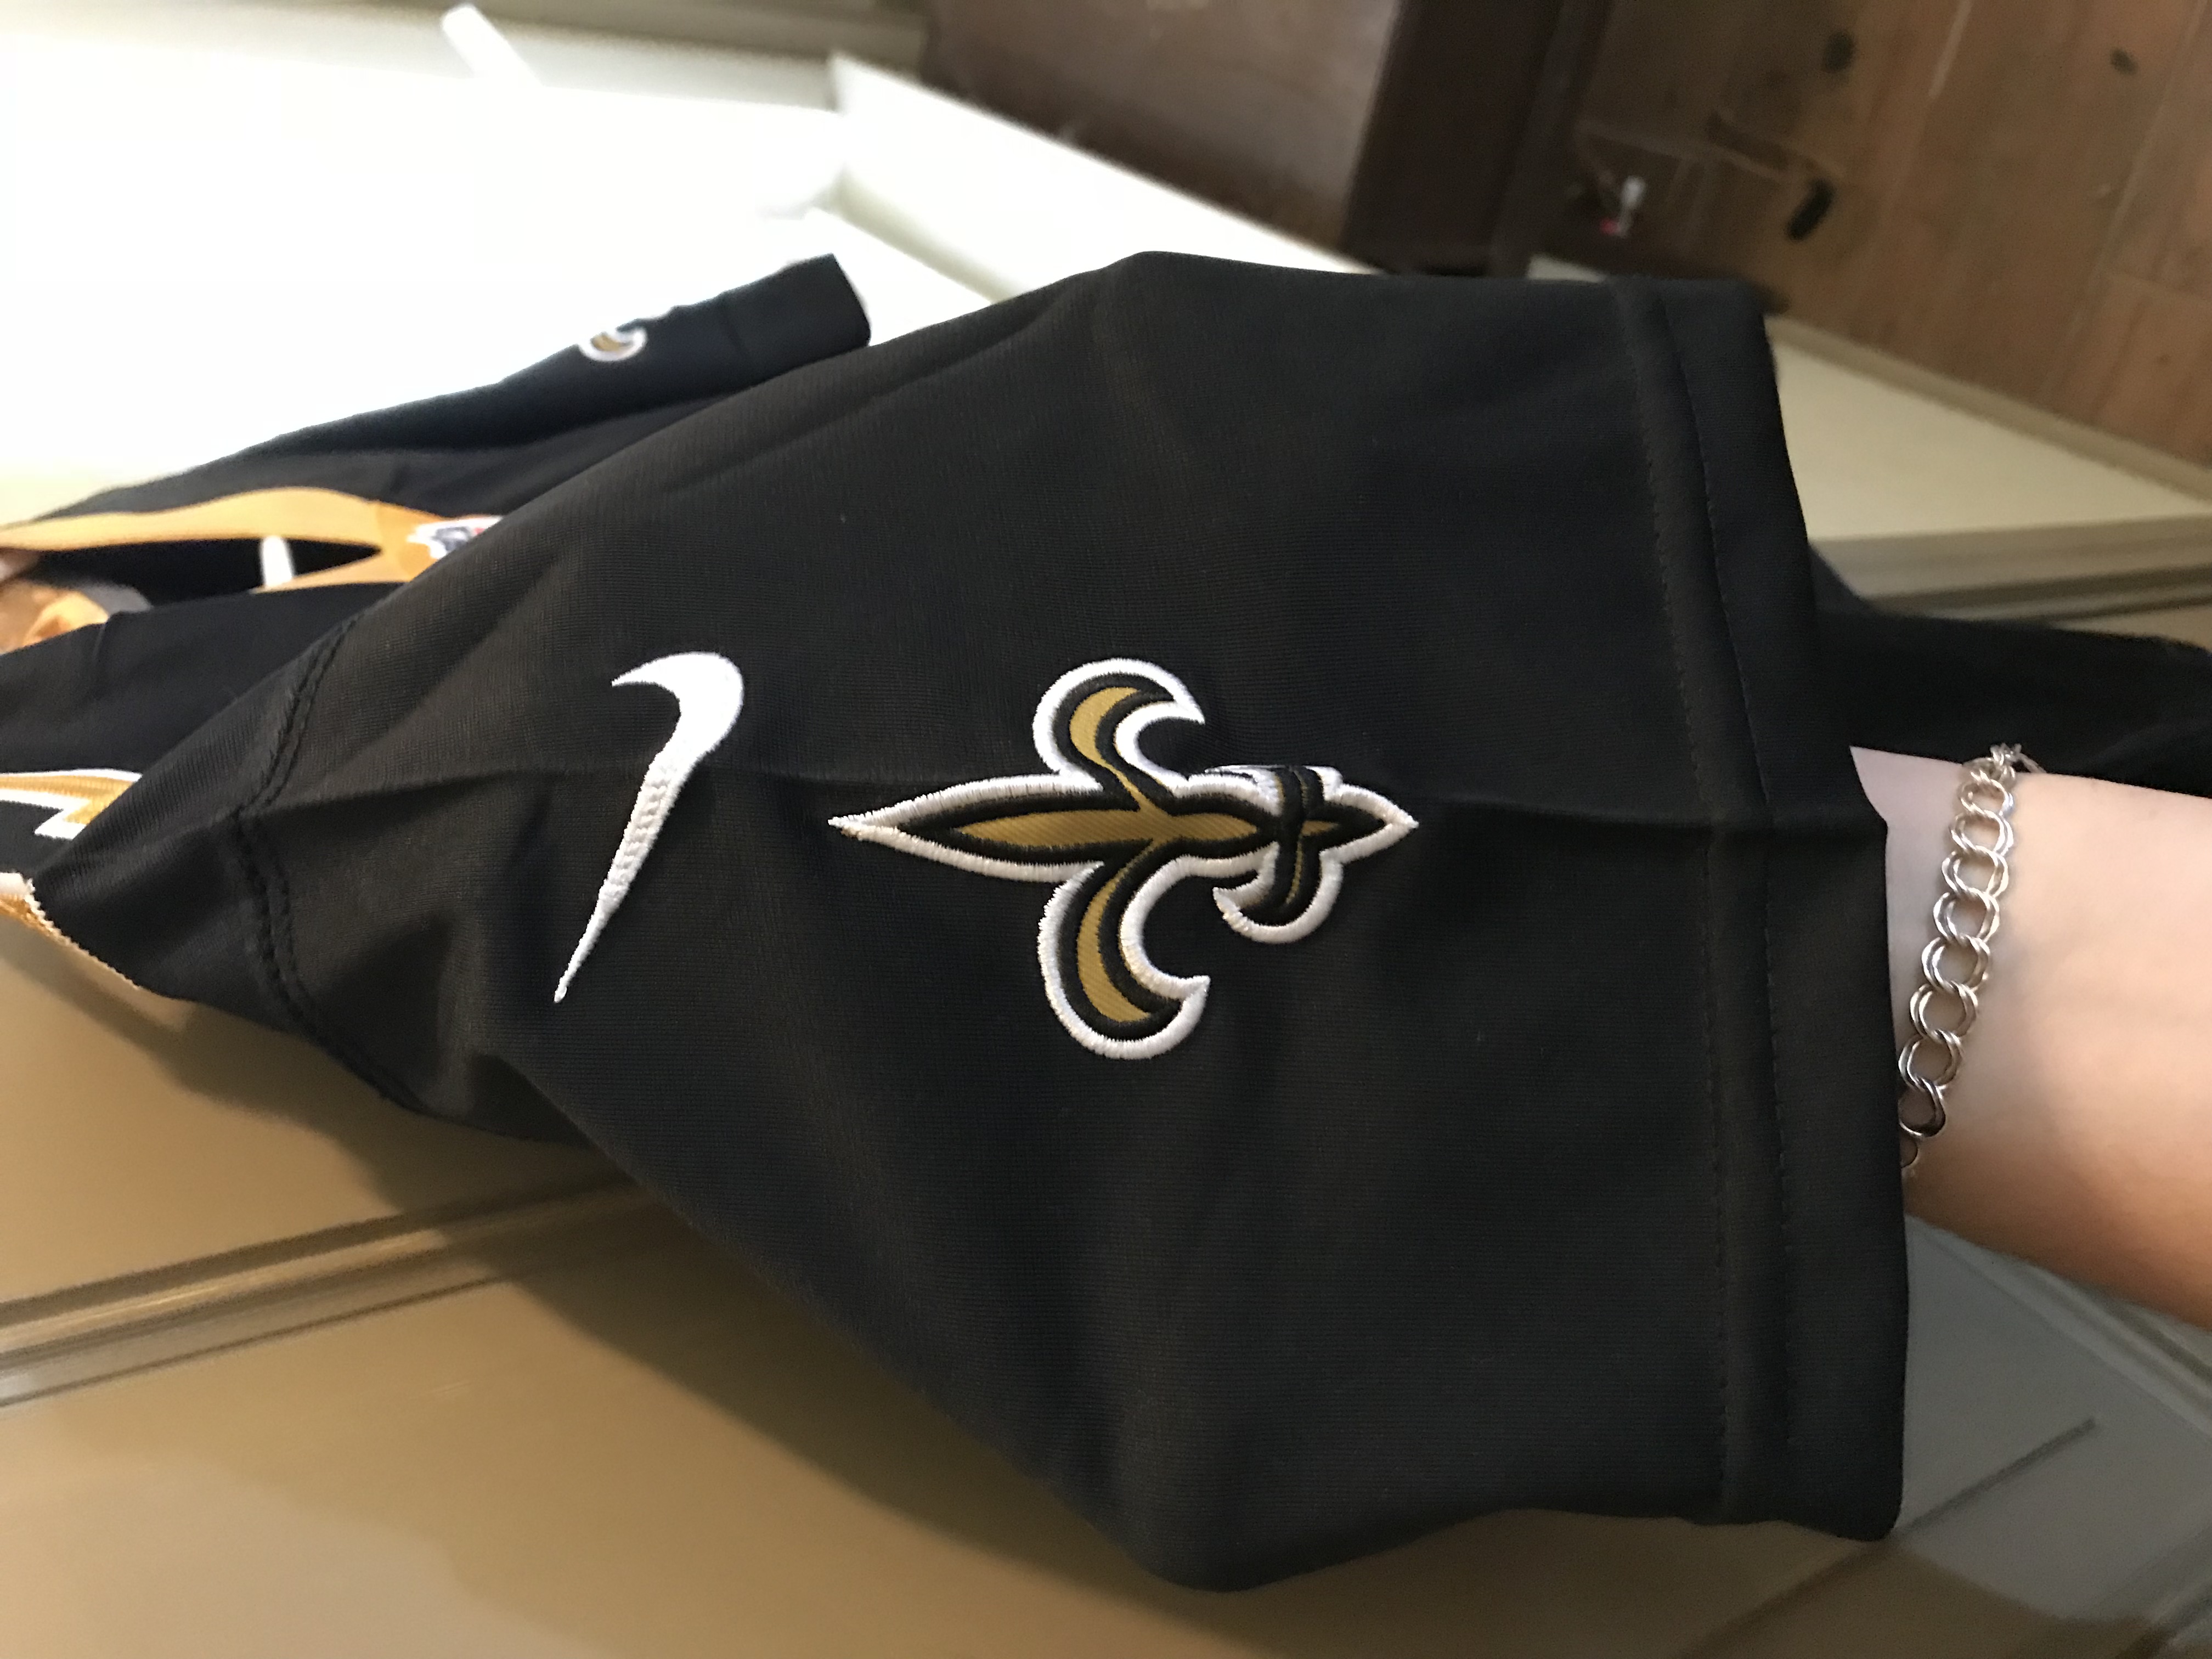 NIKE logo is mirrored, Saints logo is unofficial